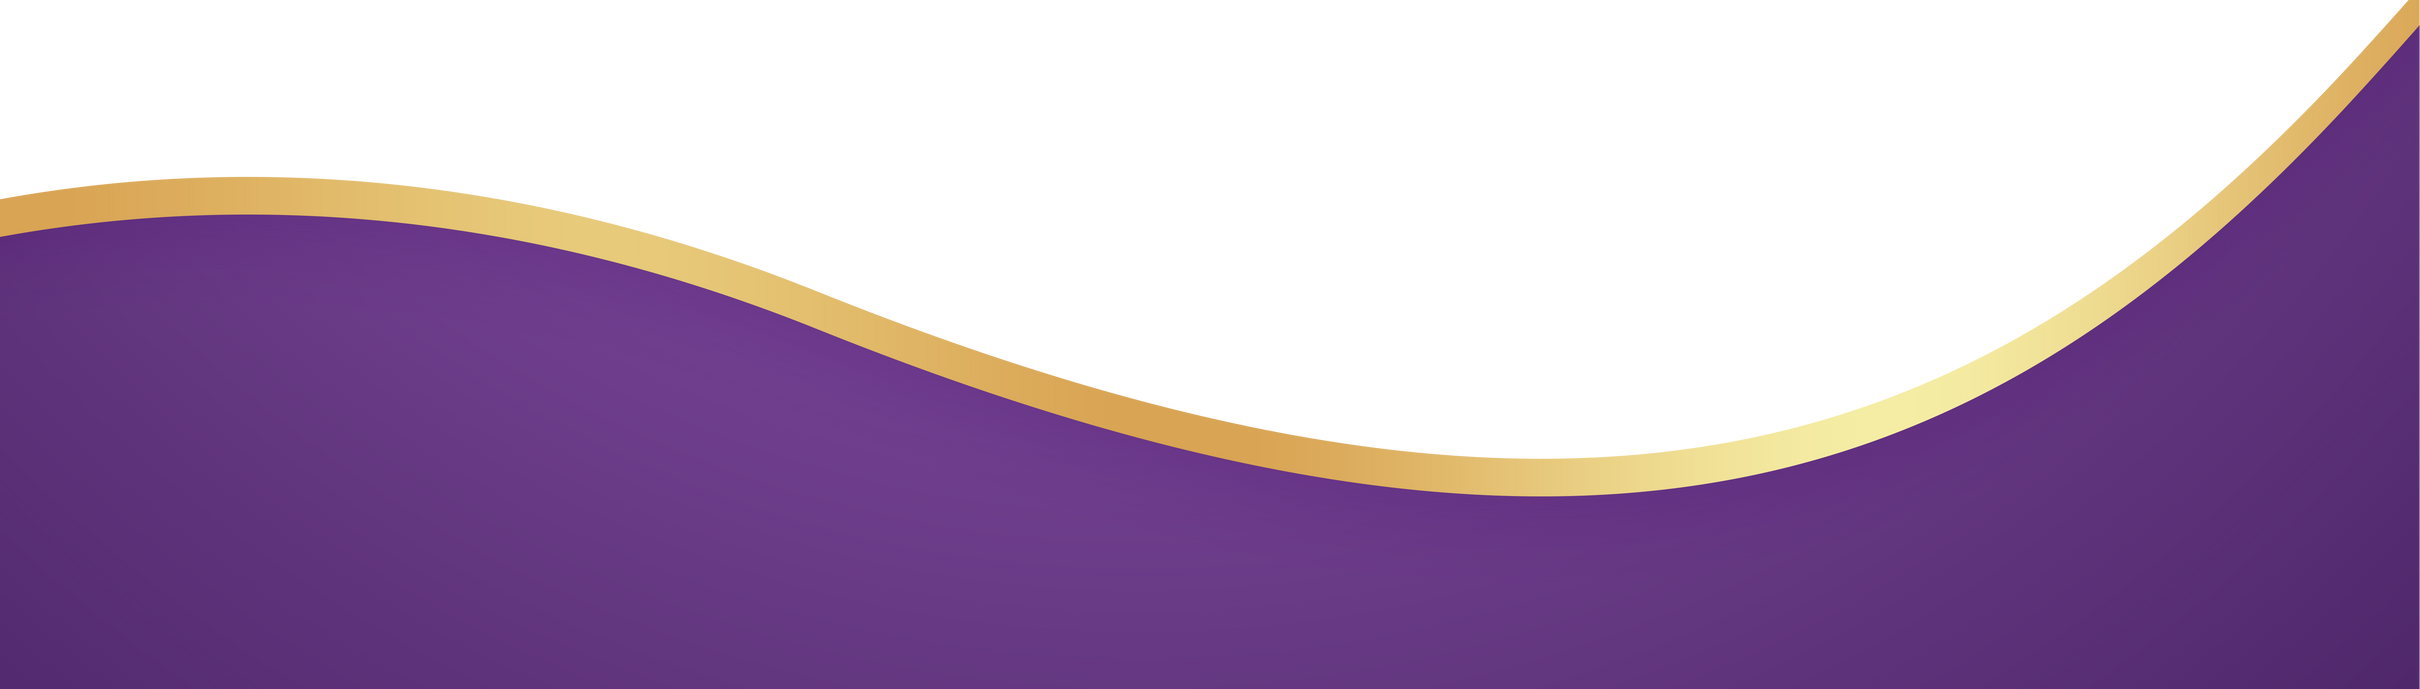 Purple and Gold Curve Border. Wavy Banner. Wave Banner.